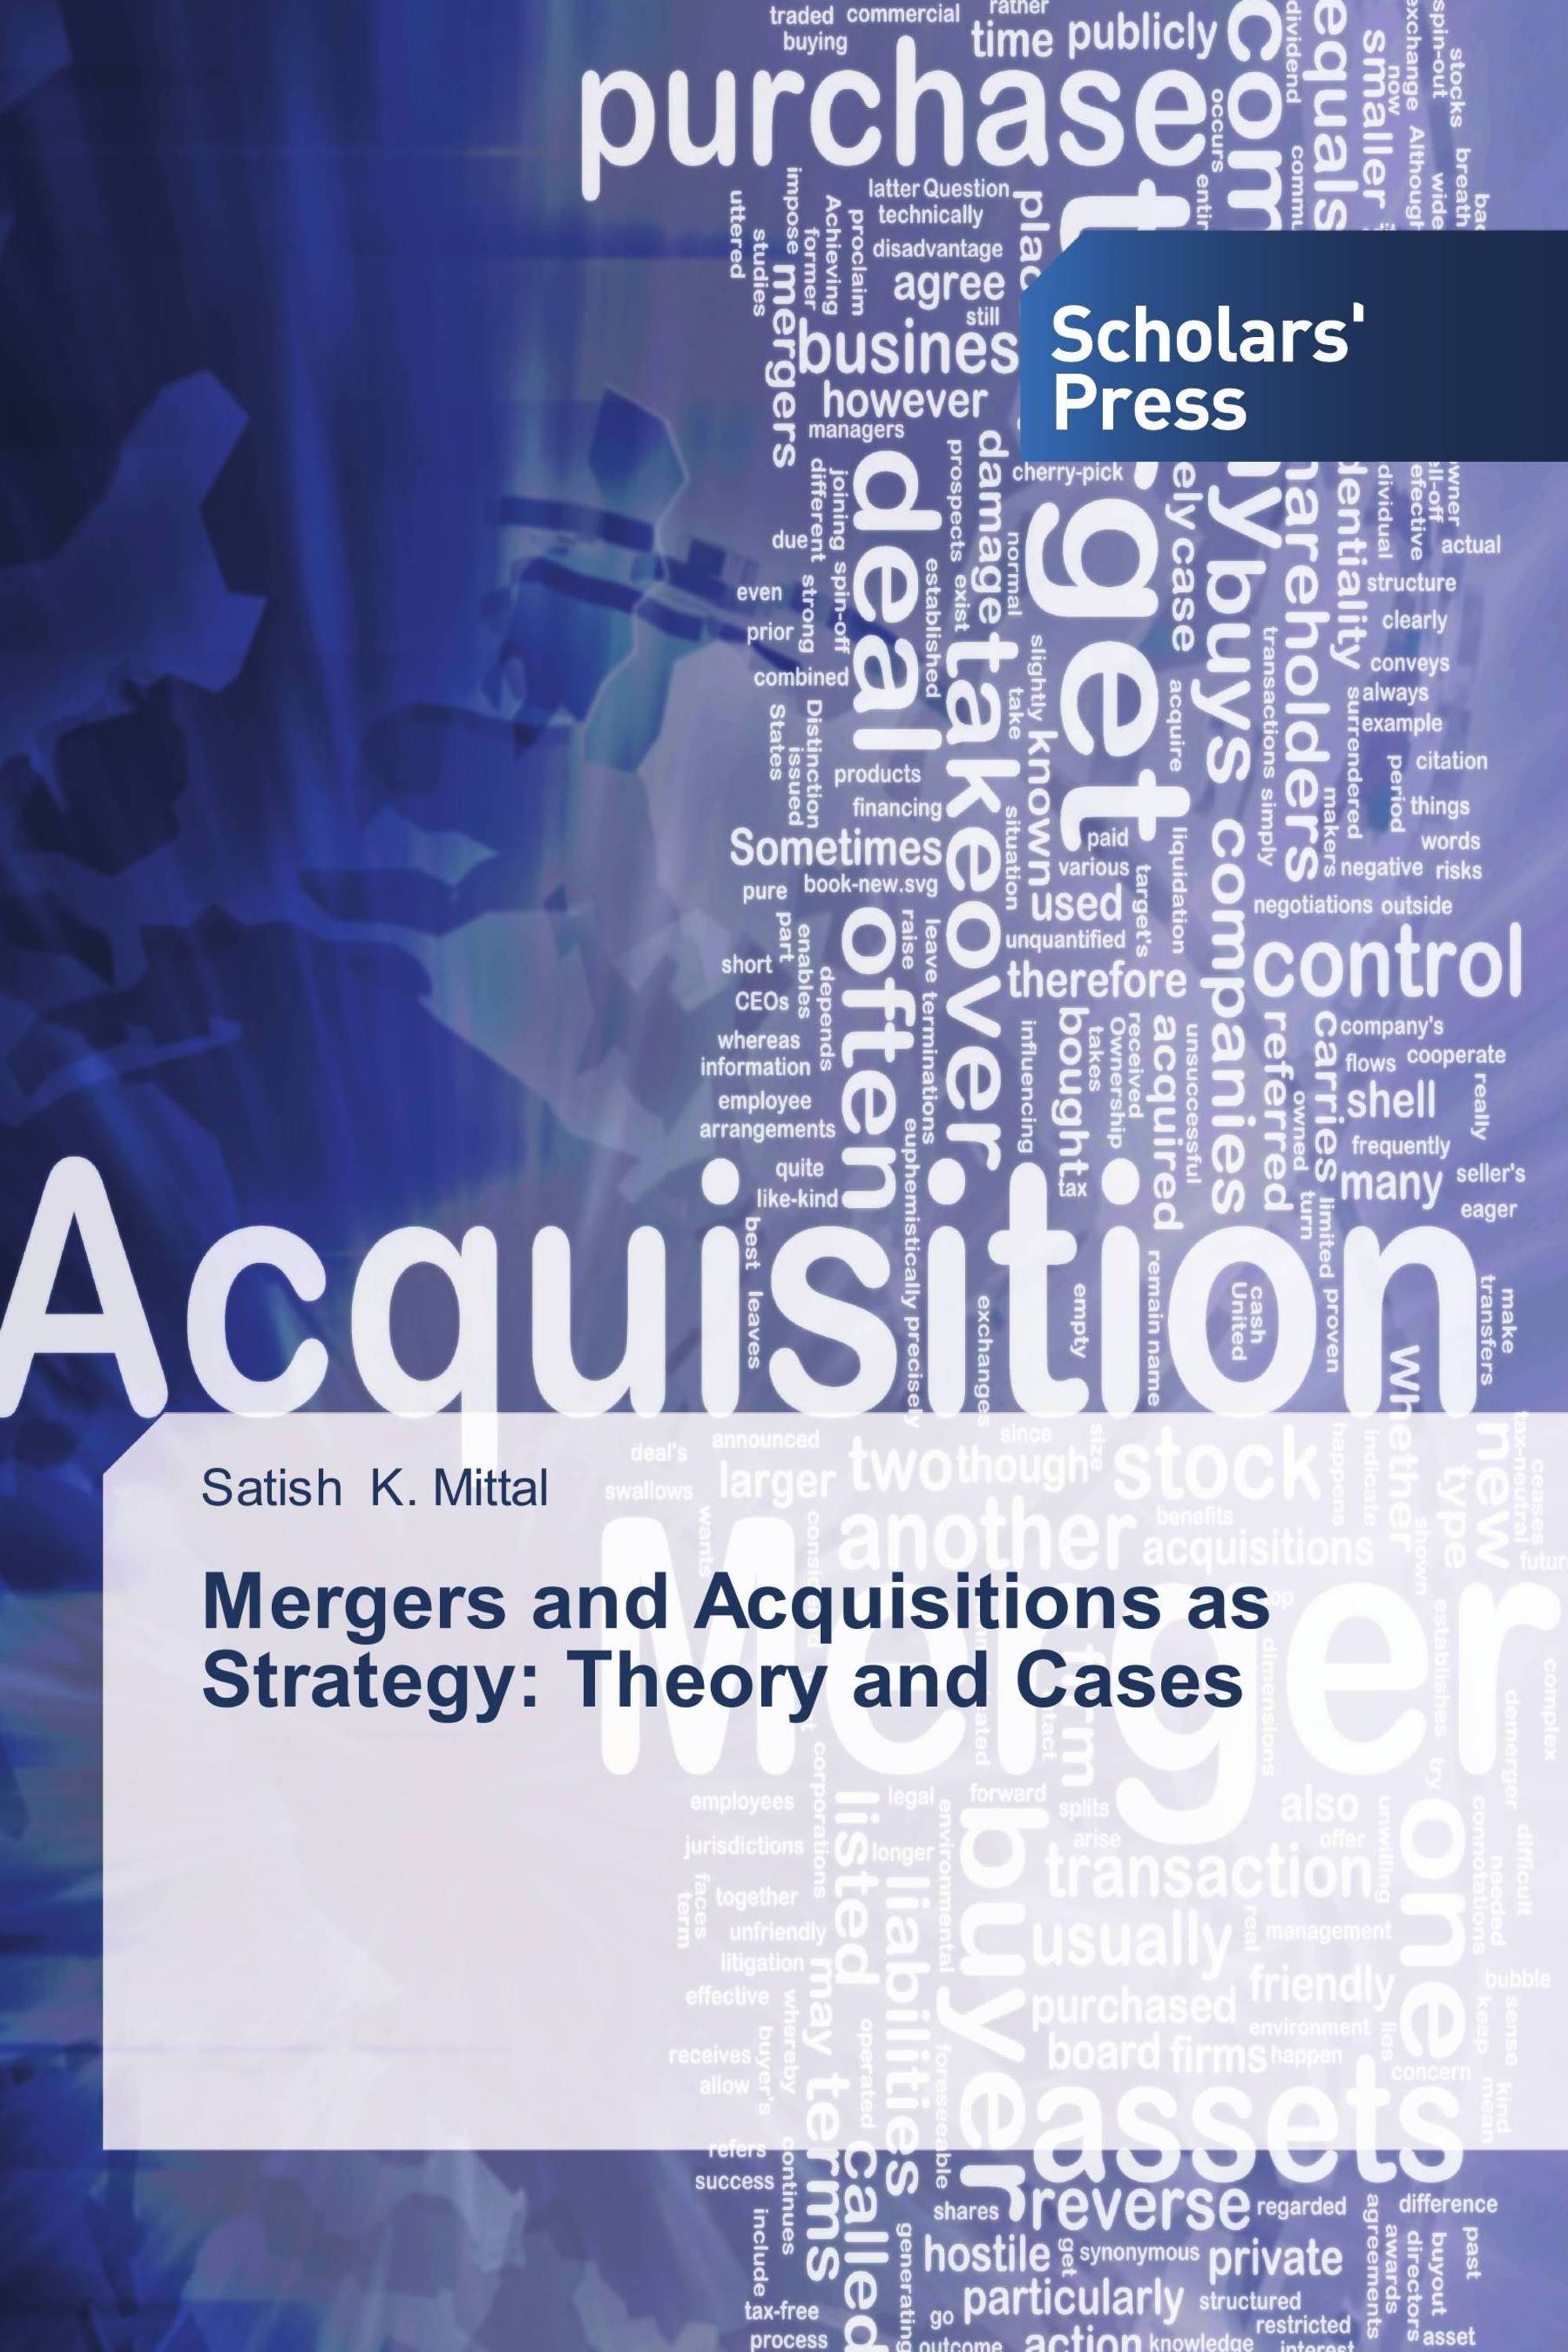 Mergers and Acquisitions as Strategy: Theory and Cases